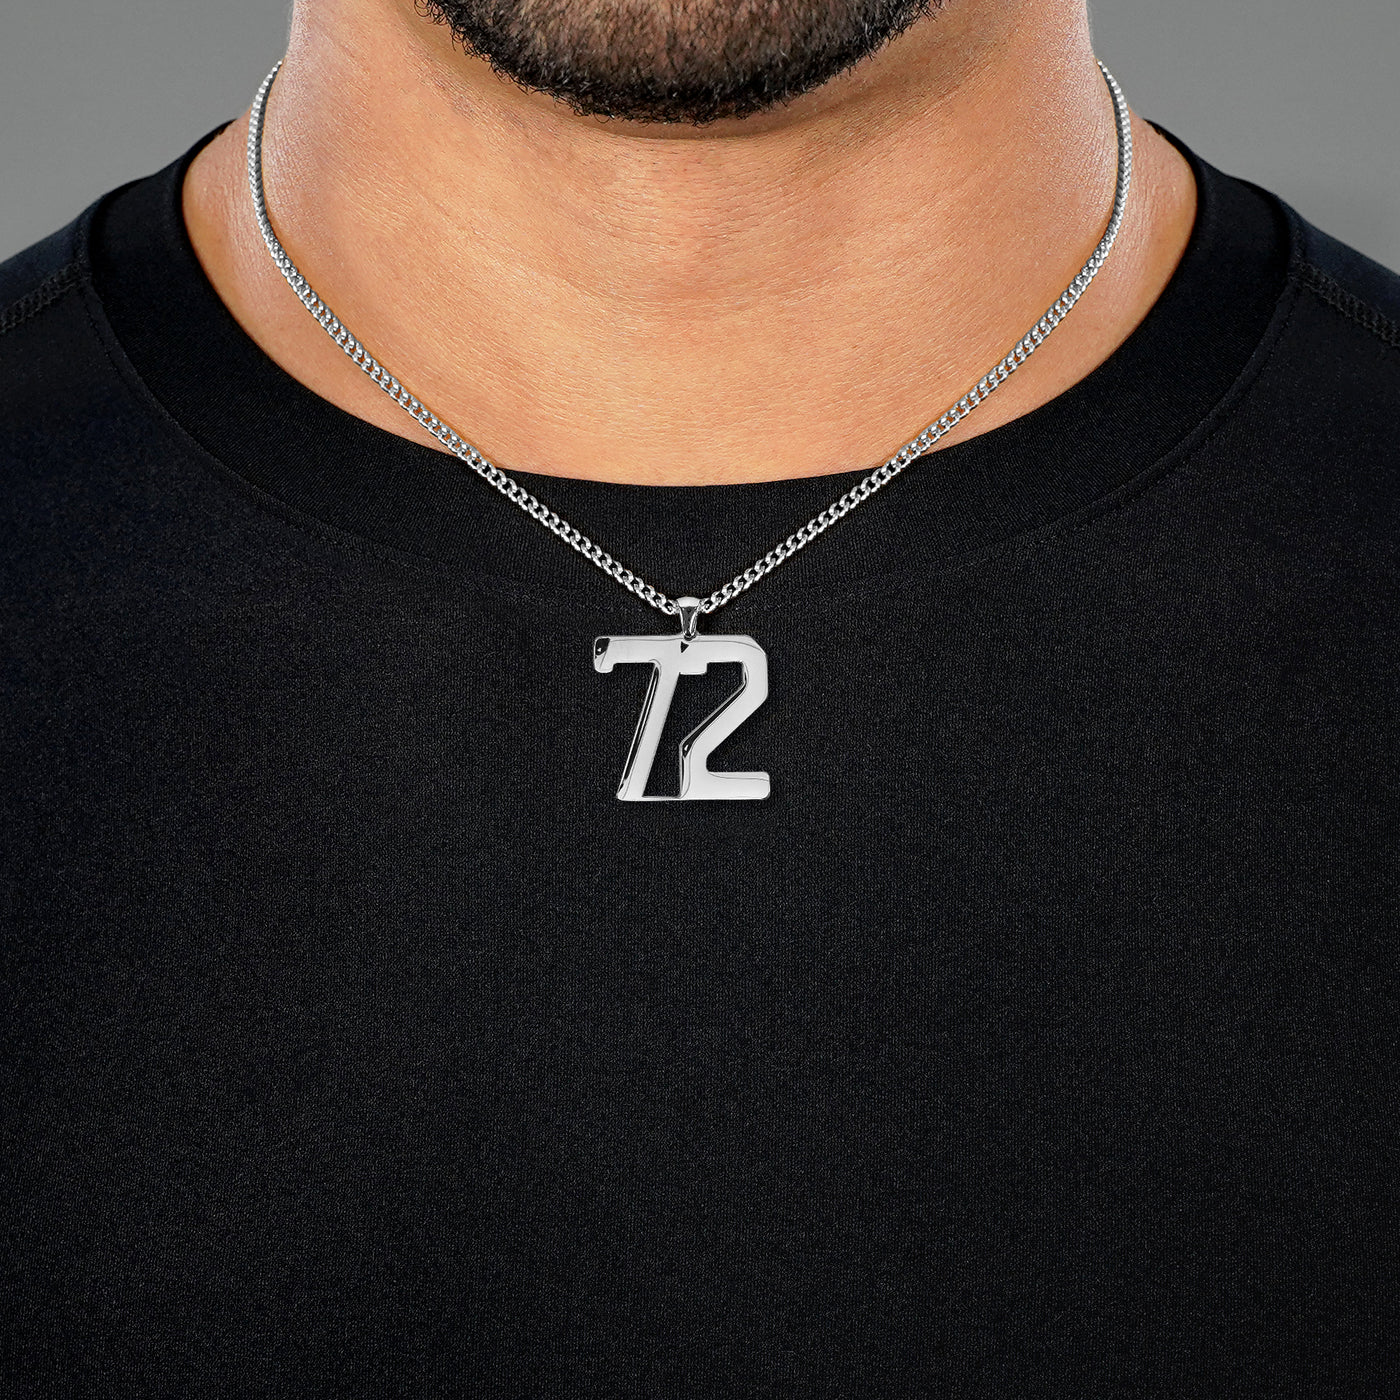 72 Number Pendant with Chain Necklace - Stainless Steel